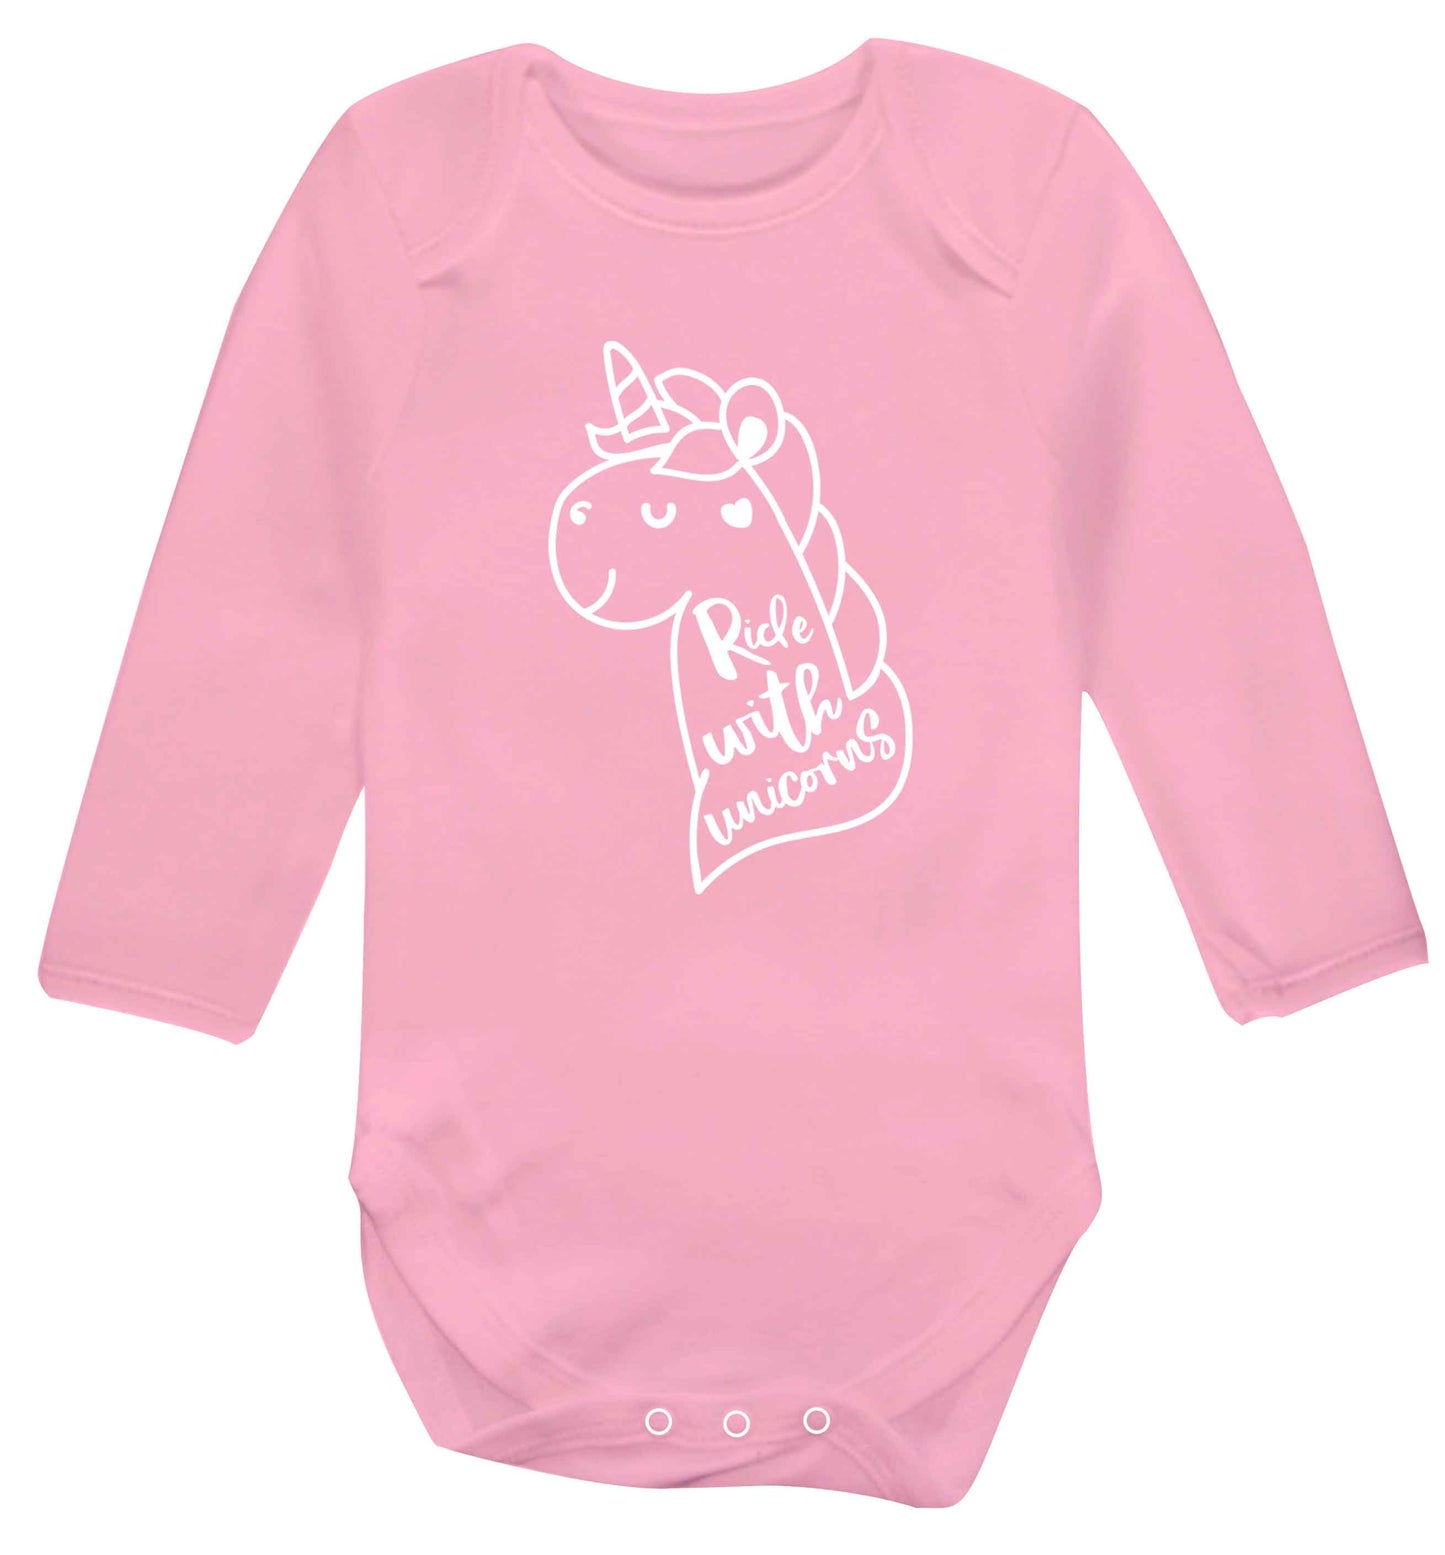 Ride with unicorns Baby Vest long sleeved pale pink 6-12 months